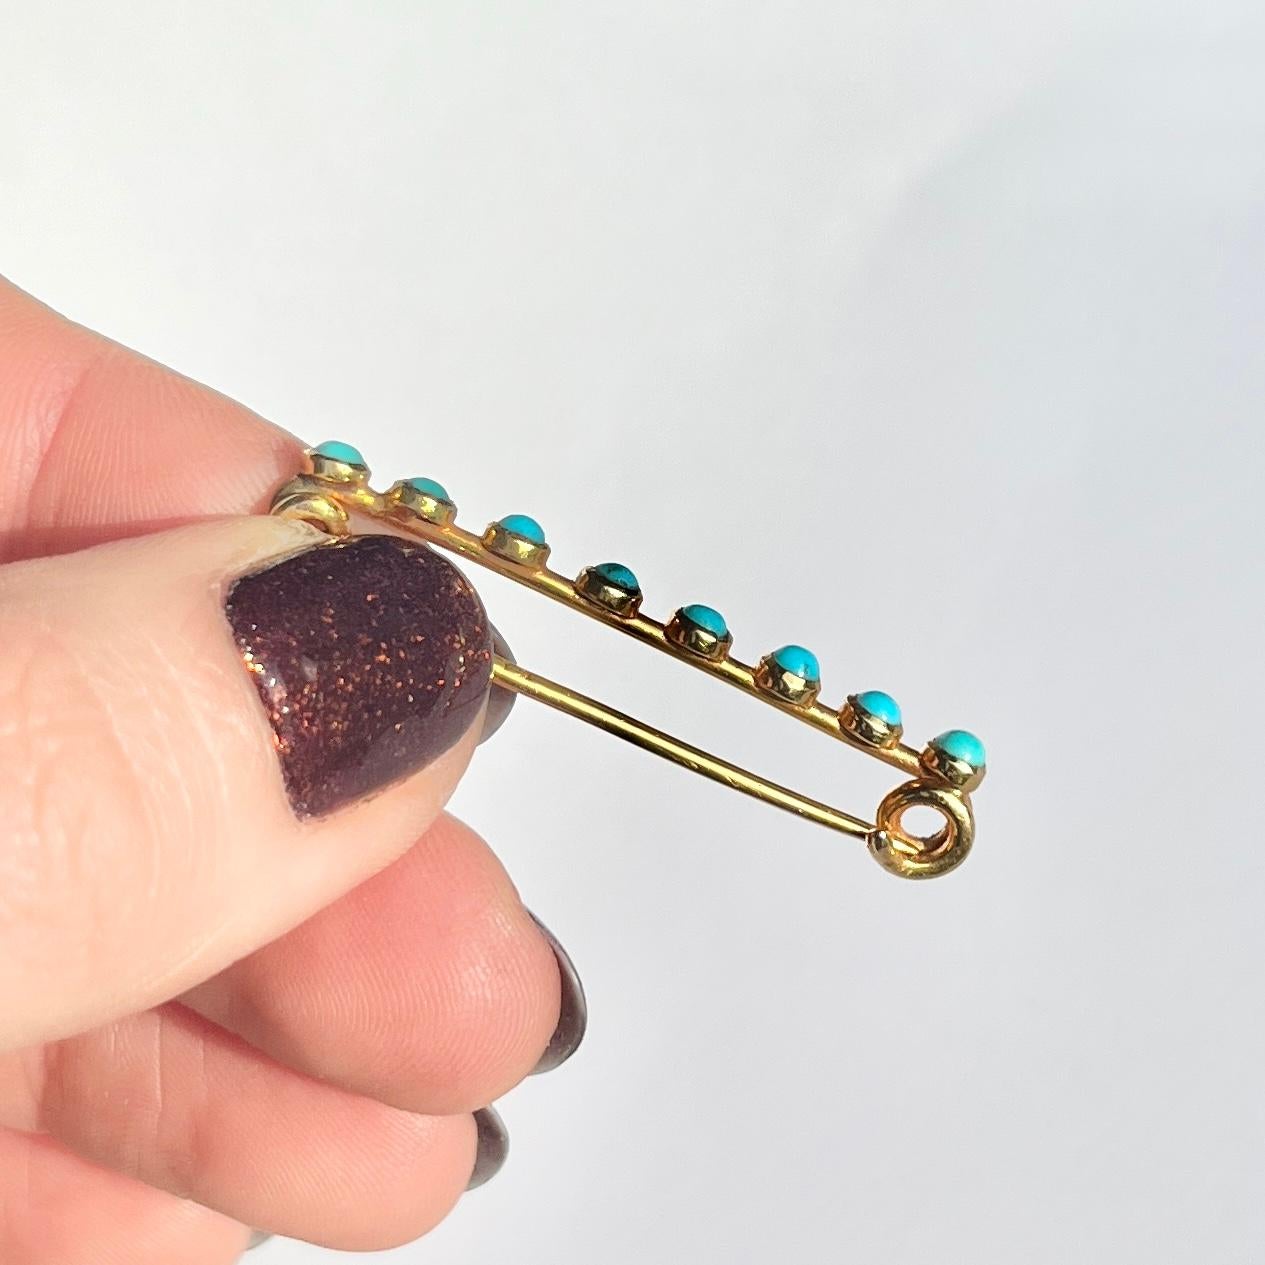 This lovely pin holds 8 bright turquoise stones. The colour of the stones compliment the glossy 15 carat yellow gold perfectly. 

Stone Diameter: 2mm
Pin Length: 39mm

Weight: 2.3g